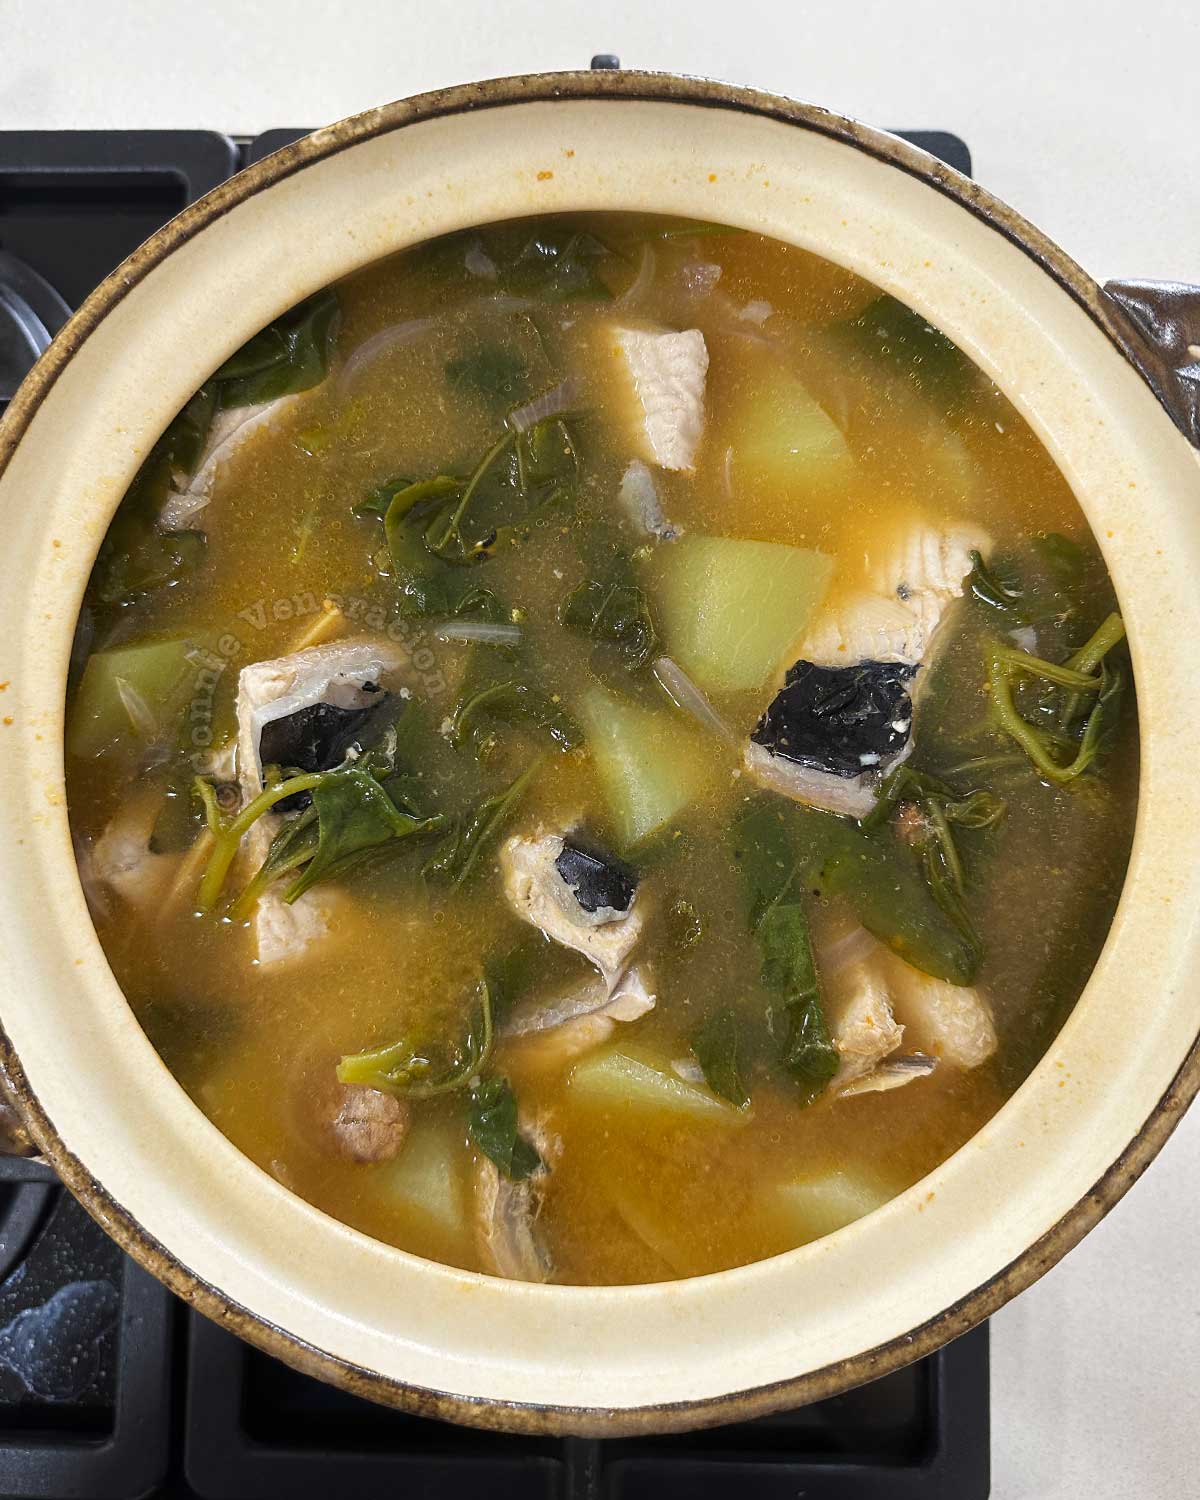 Gingered fish belly and vegetable soup (tinolang bangus) in claypot